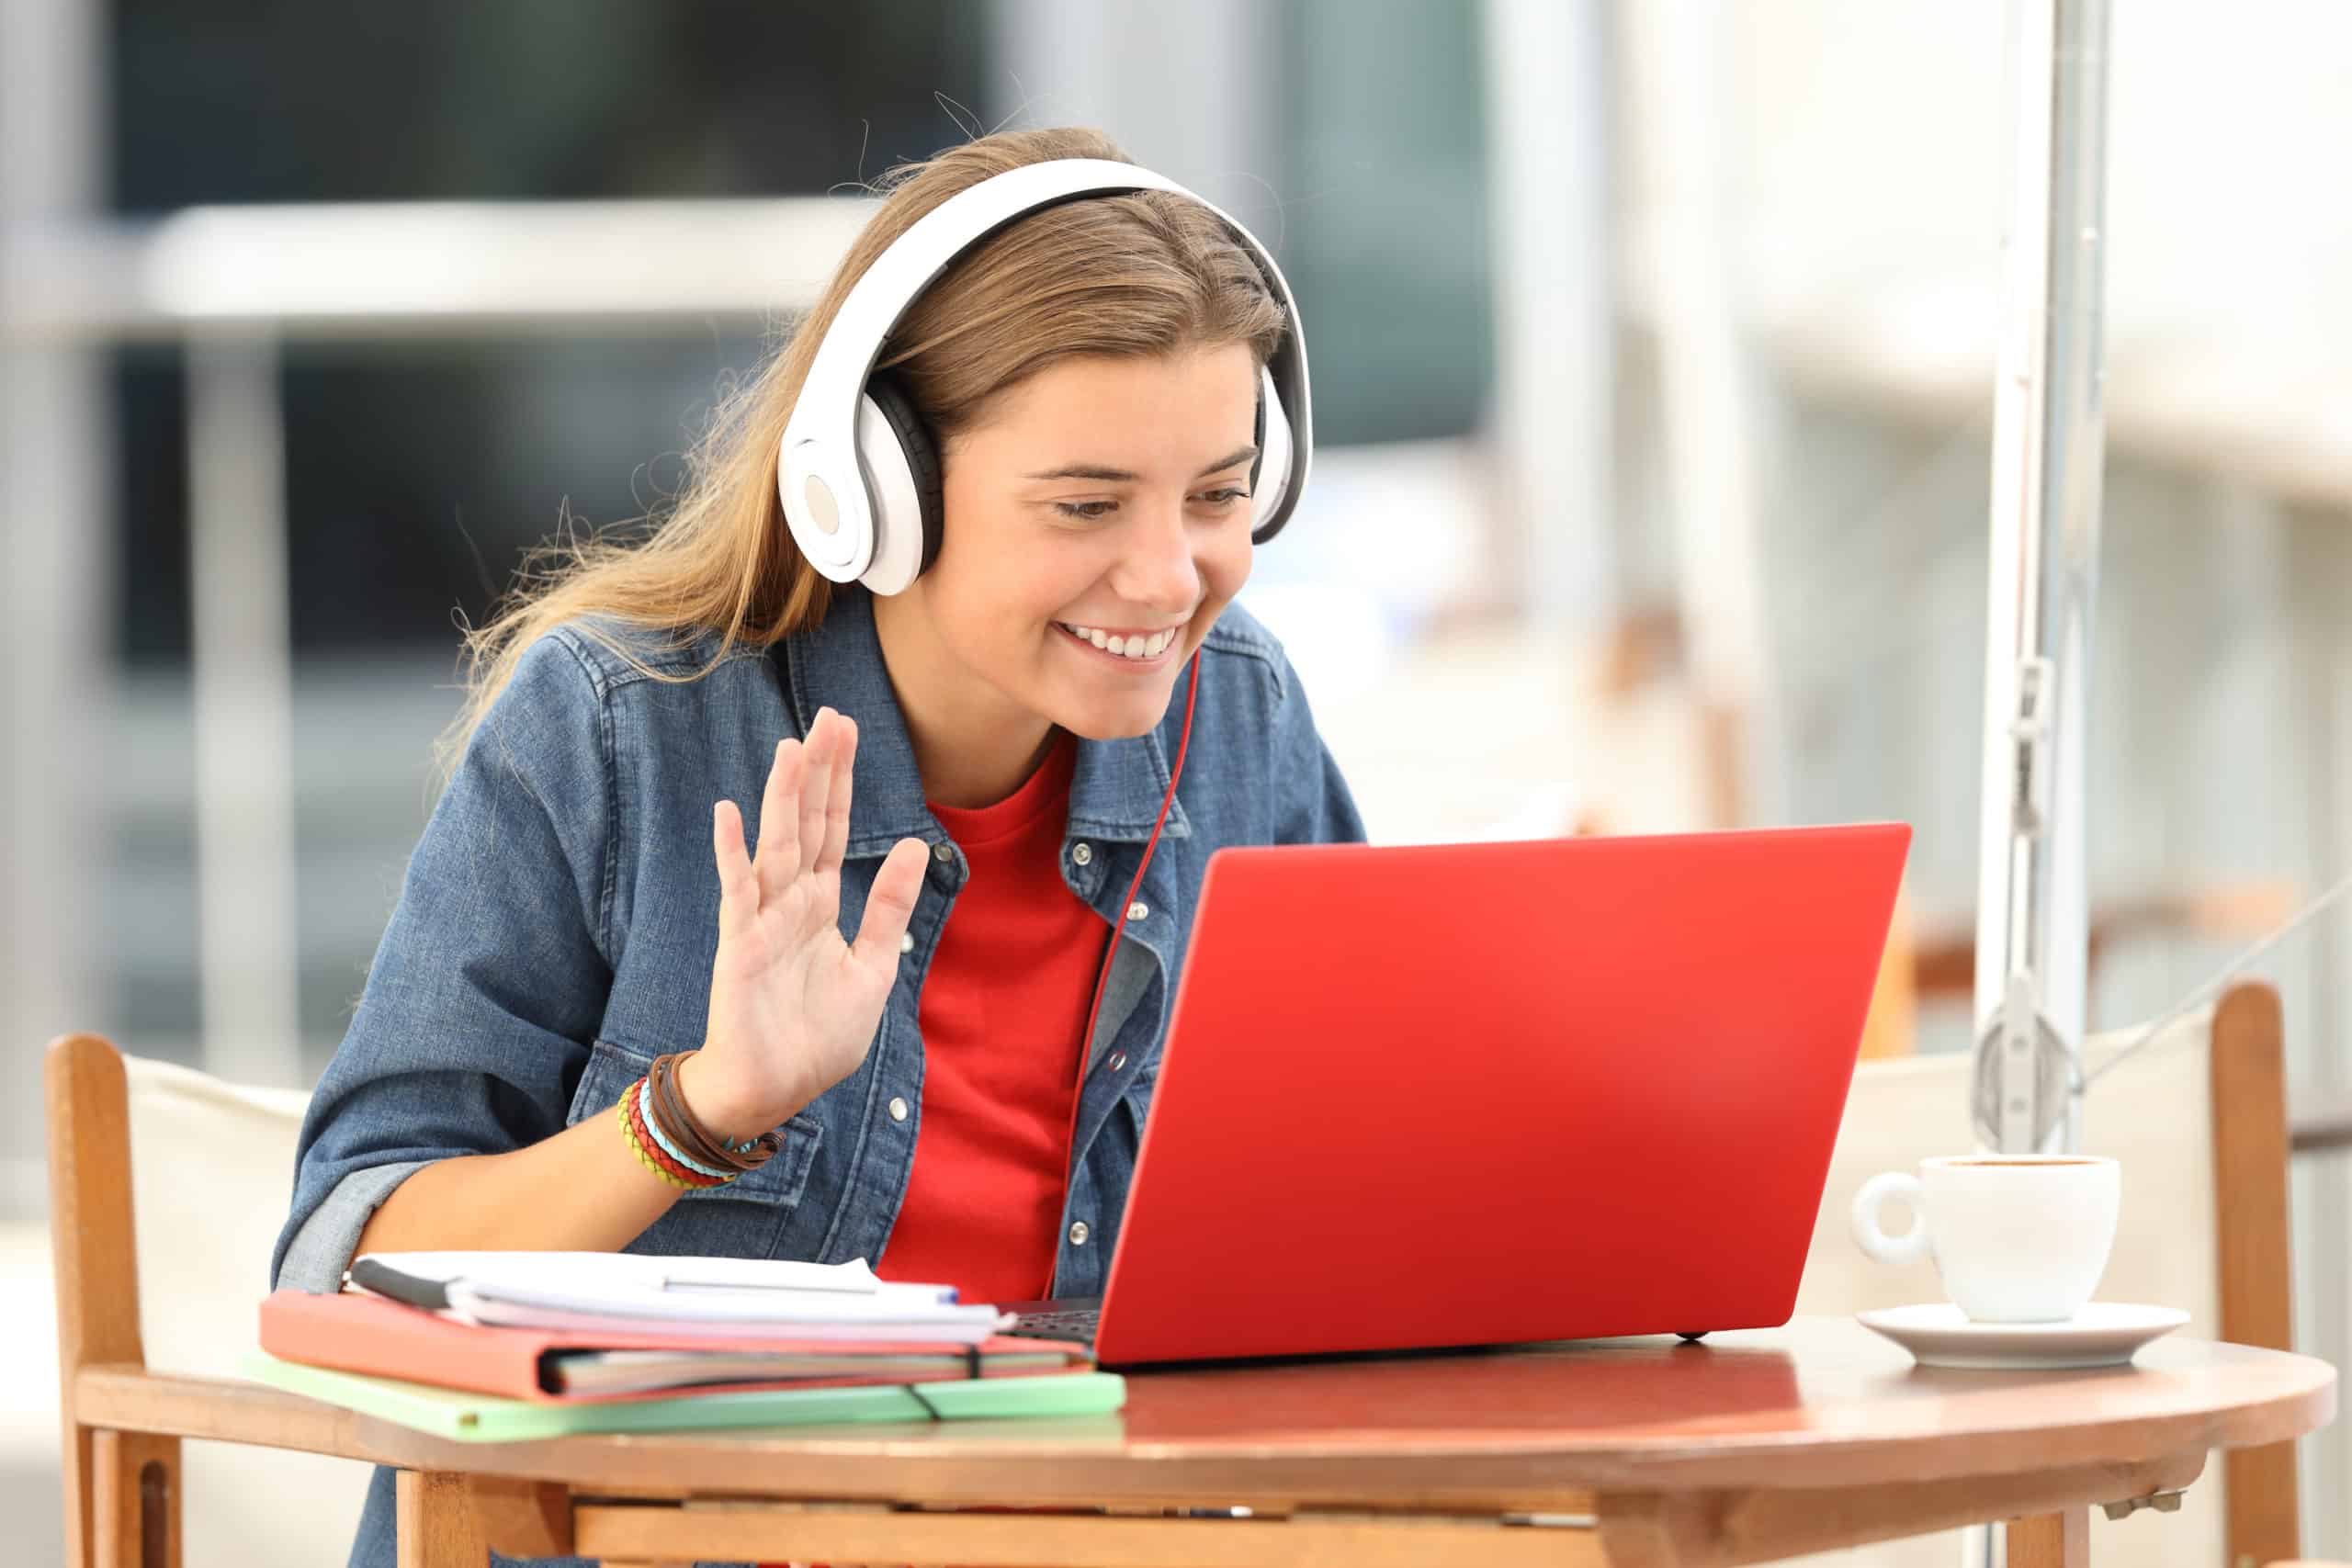 Student with headphones and red laptop